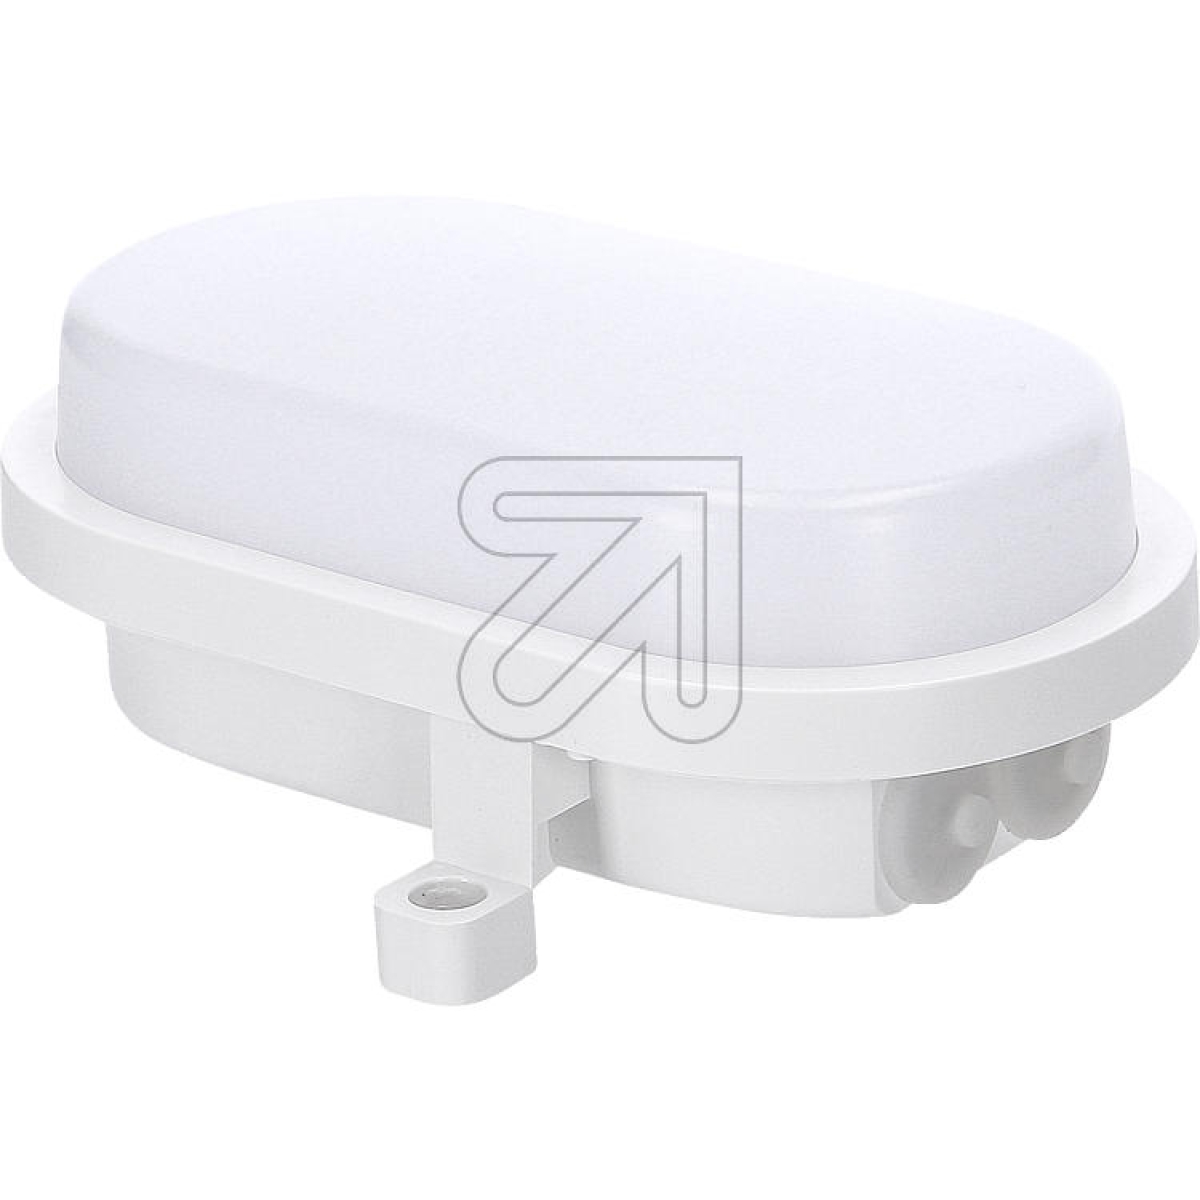 EGBLED oval fitting IP65 4-9W CCT, white 3000/4000/5000K - 4W/7W/9W adjustableArticle-No: 630010